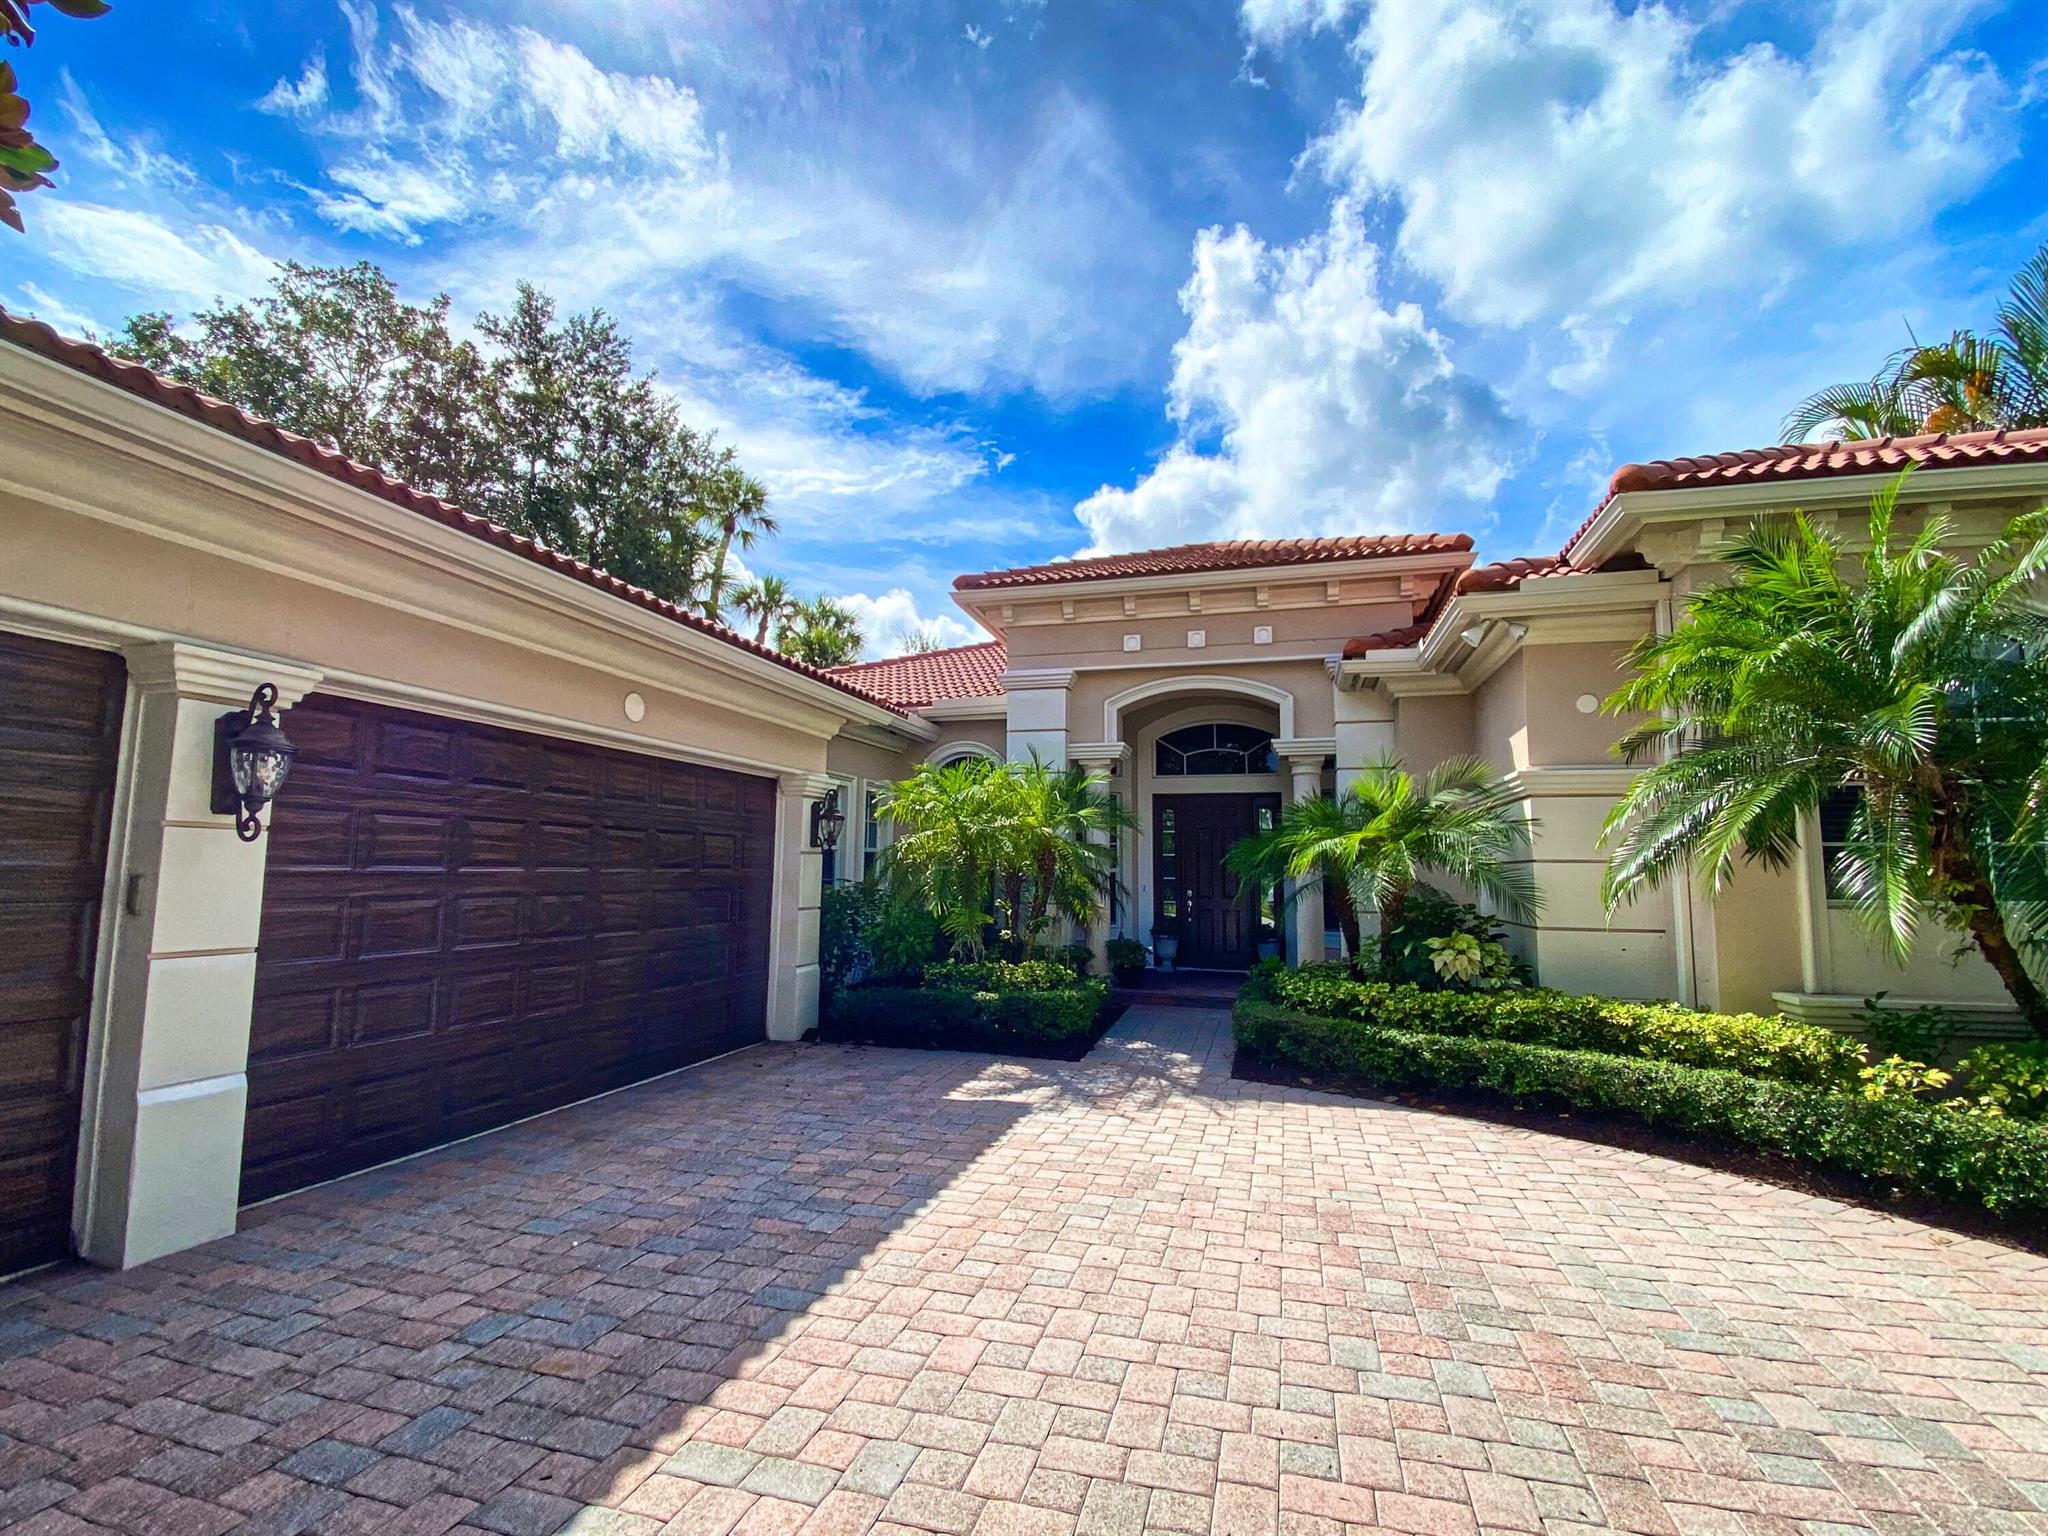 From the moment you open the front door, you'll be greeted by breathtaking scene of sun- soaked palm trees, lush tropical foliage, and a long-water view to the 16th tee of the signature Greg Norman course at JUPITER COUNTRY CLUB. whether a winter retreat or permanent residence in the city Golf Digest calls the capital of professional golf, this 4BEd/4Bath Single Level Pool Home on a private corner lot, has everything you need to live, work and play in this South Florida paradise, including : separate Den, Family, Living & Dining Rooms (all with Poll/Lake & Golf Course Views), a Large Master Suite with Spa-Like Bath, ensuite 2nd/3rd/4th Bedrooms with walk-in Closets.(SEE SUPPLEMENT REMARKS ) A private, spacious lanai, with pool, spa, and long lake views add a timeless resort feel that will continue to captivate you for many years to come. Amenities at Jupiter CC include golf, tennis, fitness/spa, and 2 dining venues. And with no need to wait 2-3 years for a golf membership, you can play golf and enjoy the club amenities immediately with a golf membership available for purchase. (Intermediate Golf Membership Fee of $37,000 + Tax with monthly dues of $925 + Tax)